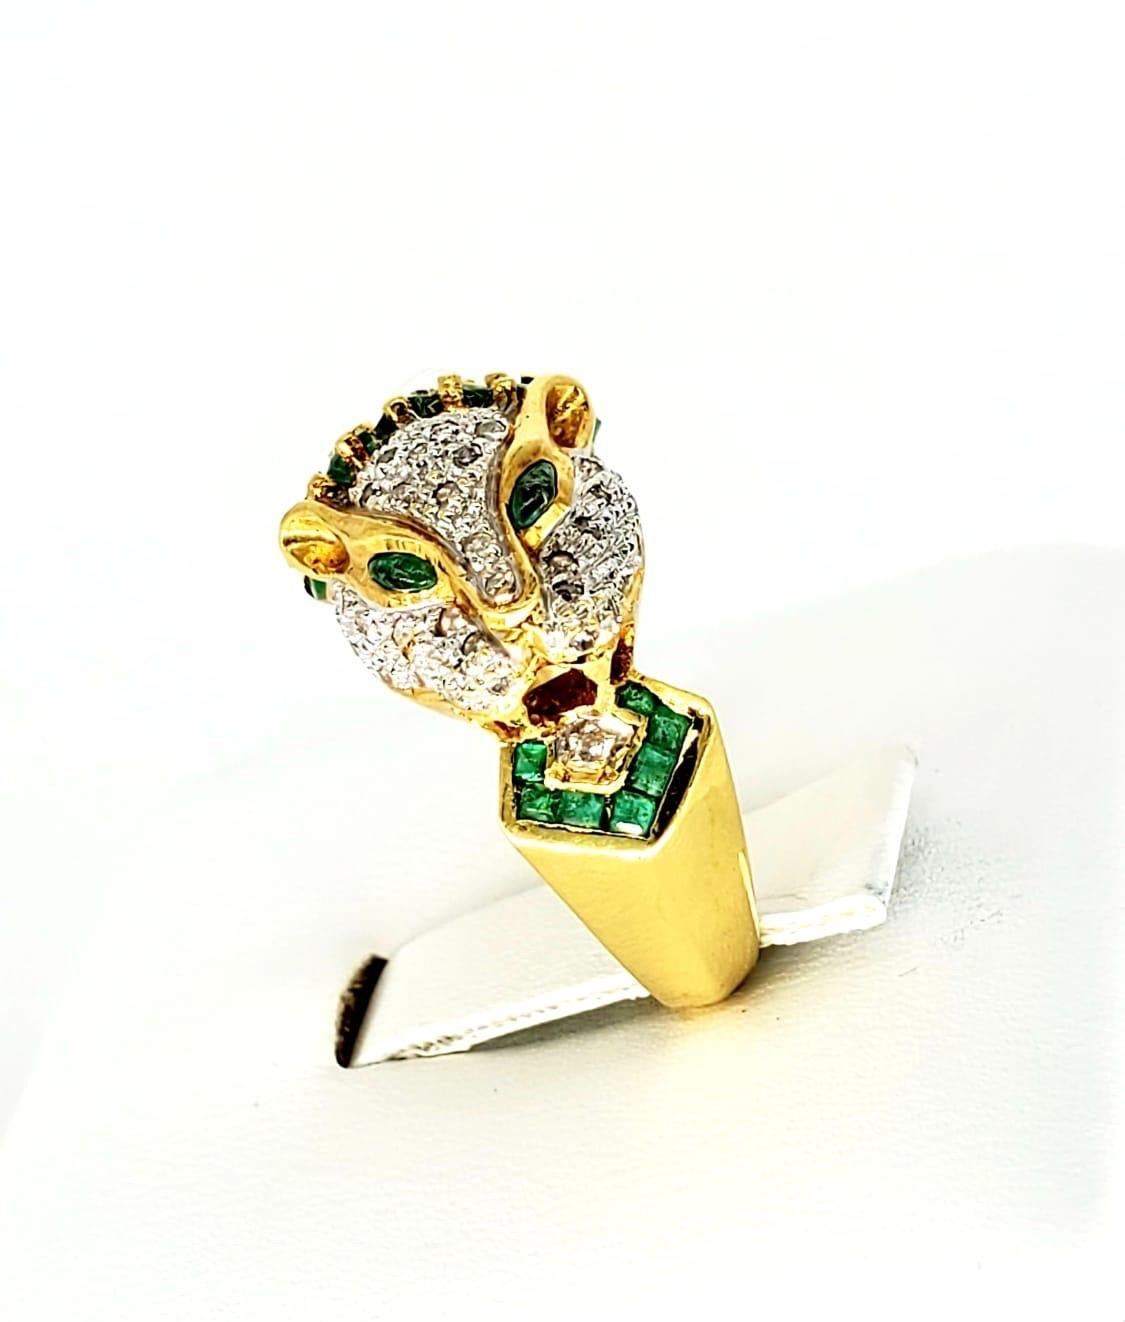 Vintage 2.70 Carat Diamond & Emerald Panther Ring. The craftsmanship on this ring is very detailed and high quality. The emeralds approx weight is 2.20 carat and the diamonds are 0.50 carat. The ring is hand crafted in 18k solid gold and stamped